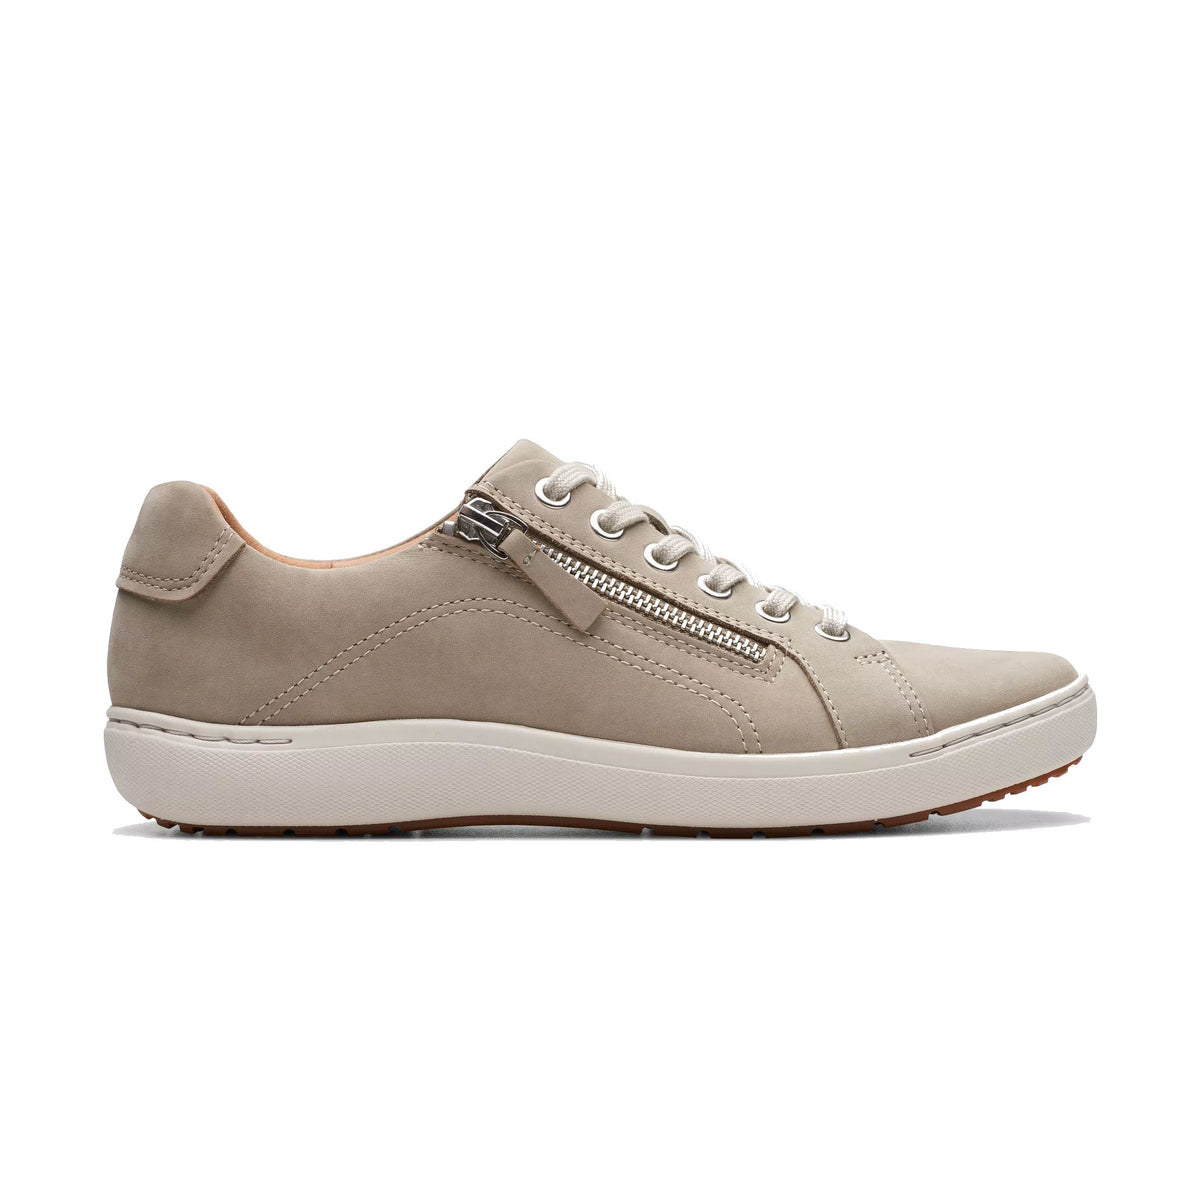 Clarks Nalle Lace Stone sneaker with zipper detail and high-grip rubber sole, displayed on a white background.